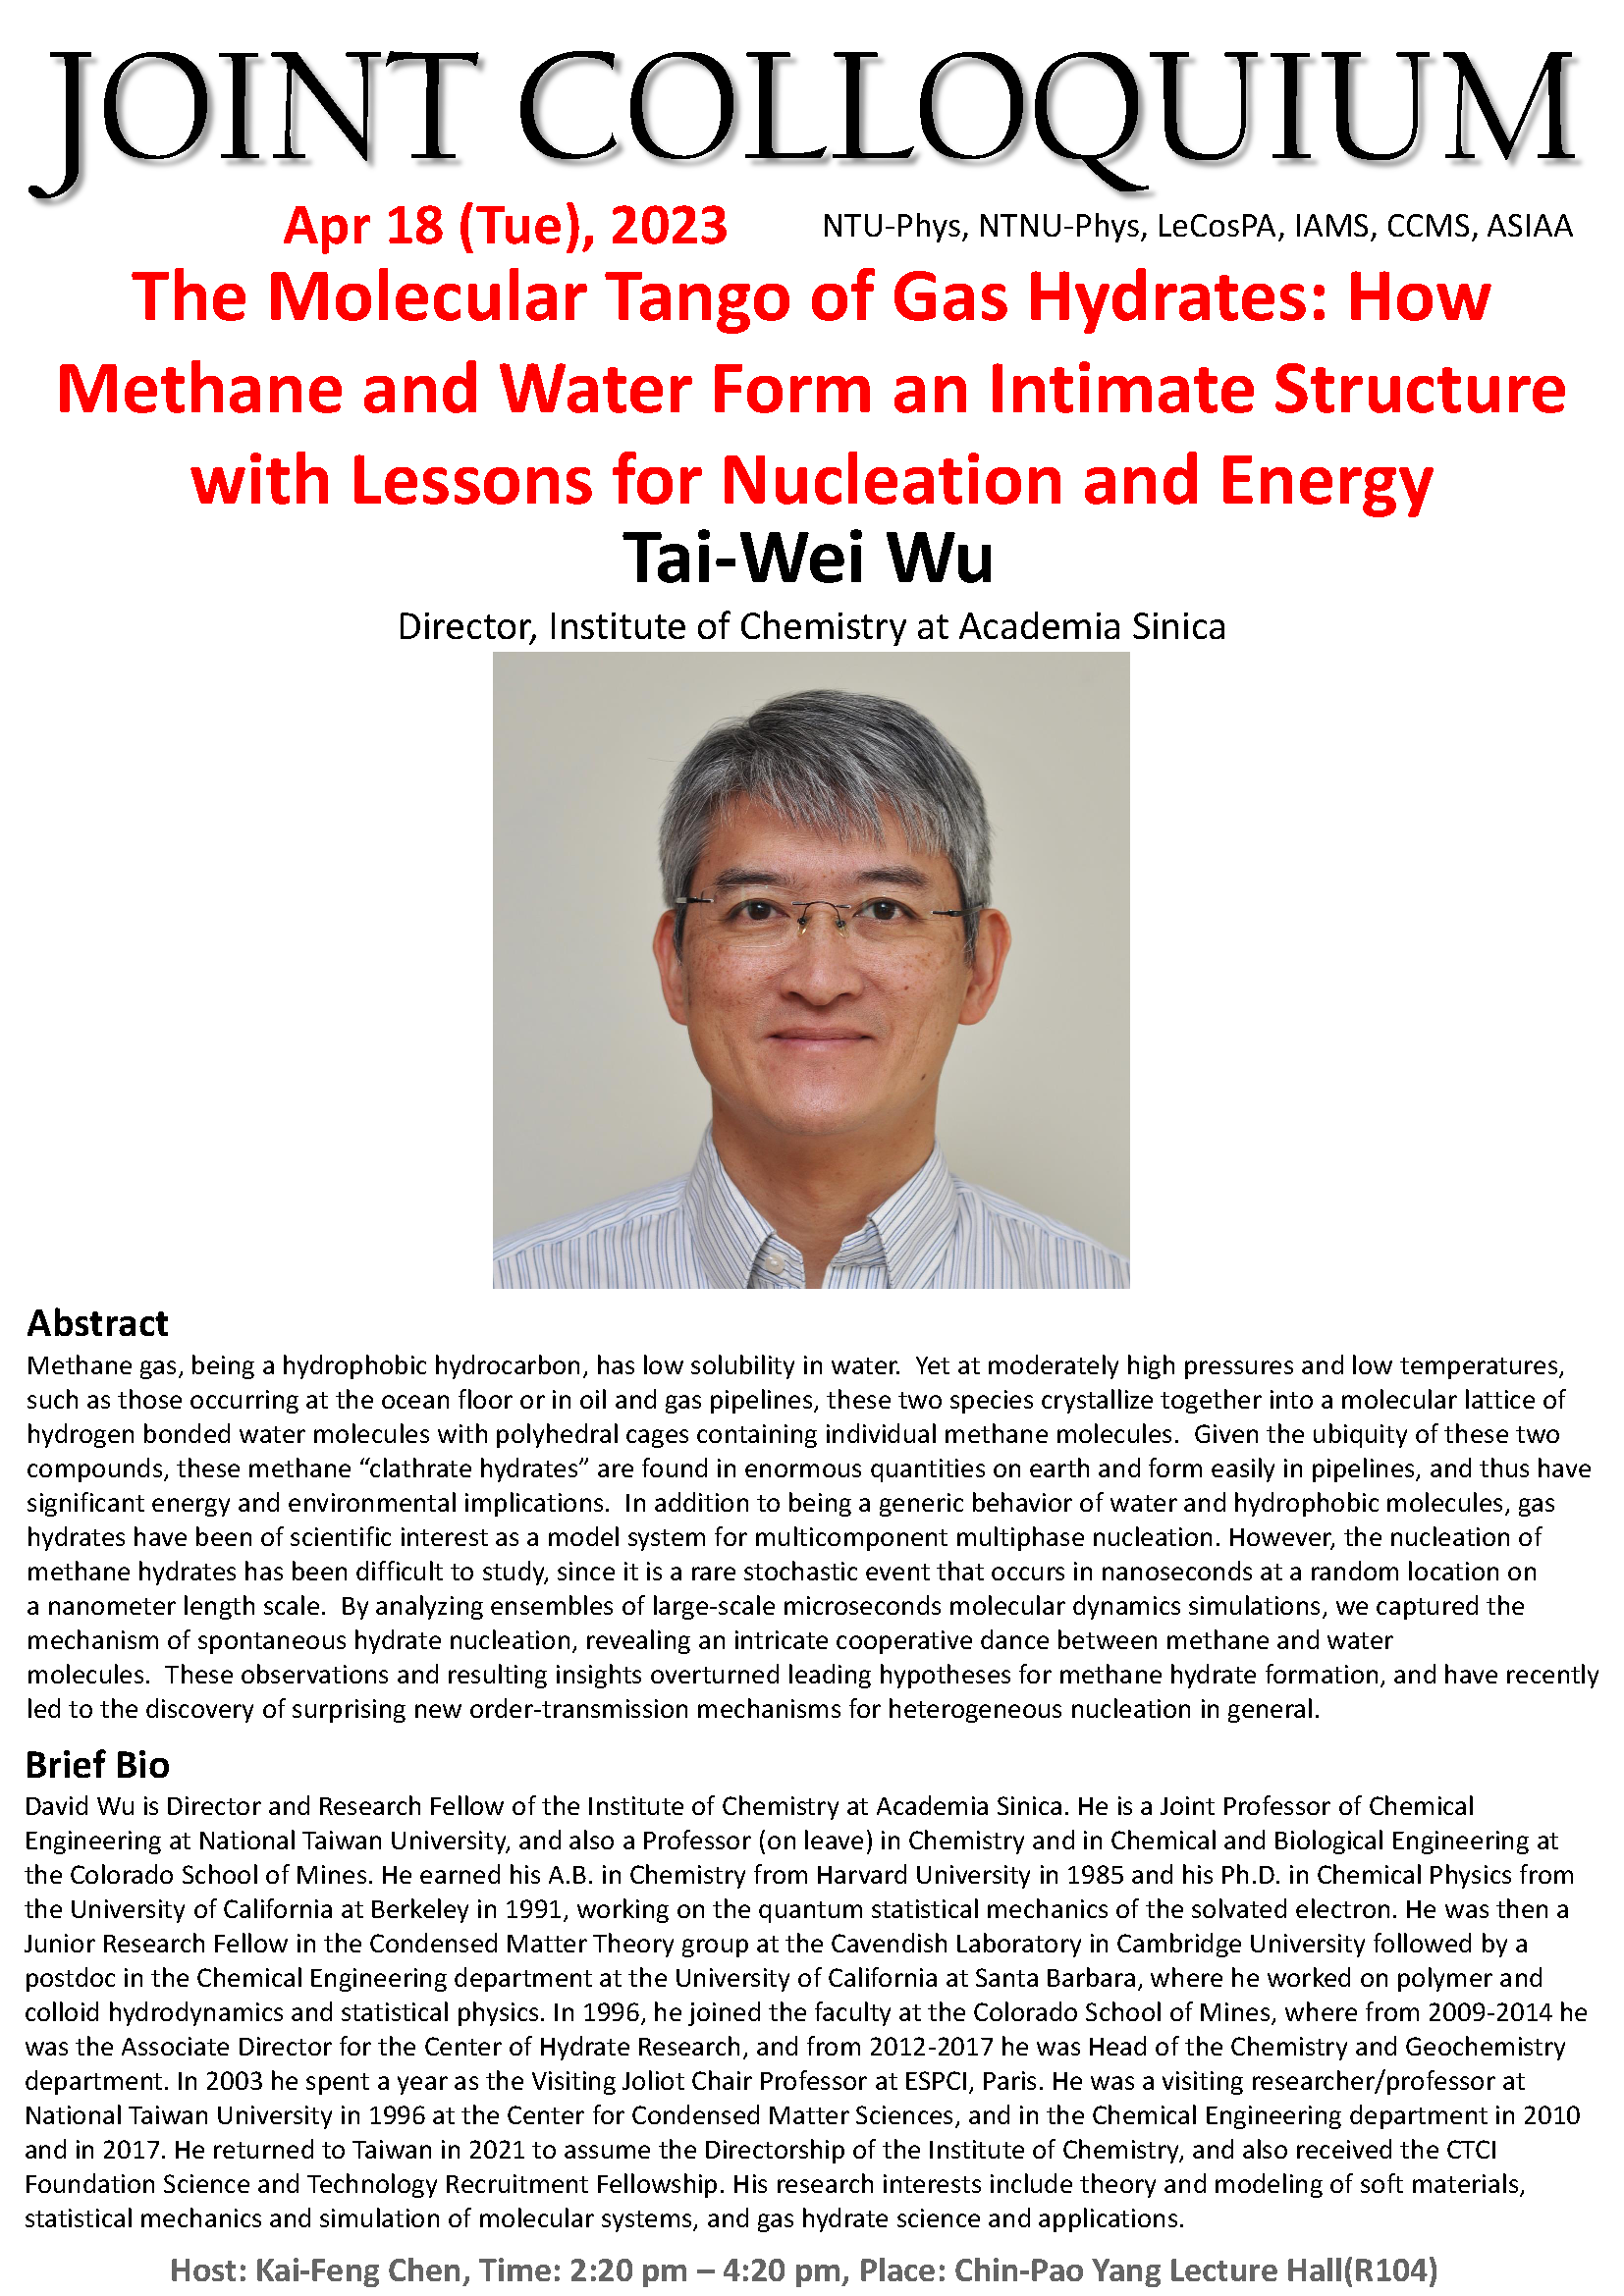 The Molecular Tango of Gas Hydrates: How Methane and Water Form an Intimate Structure with Lessons for Nucleation and Energy